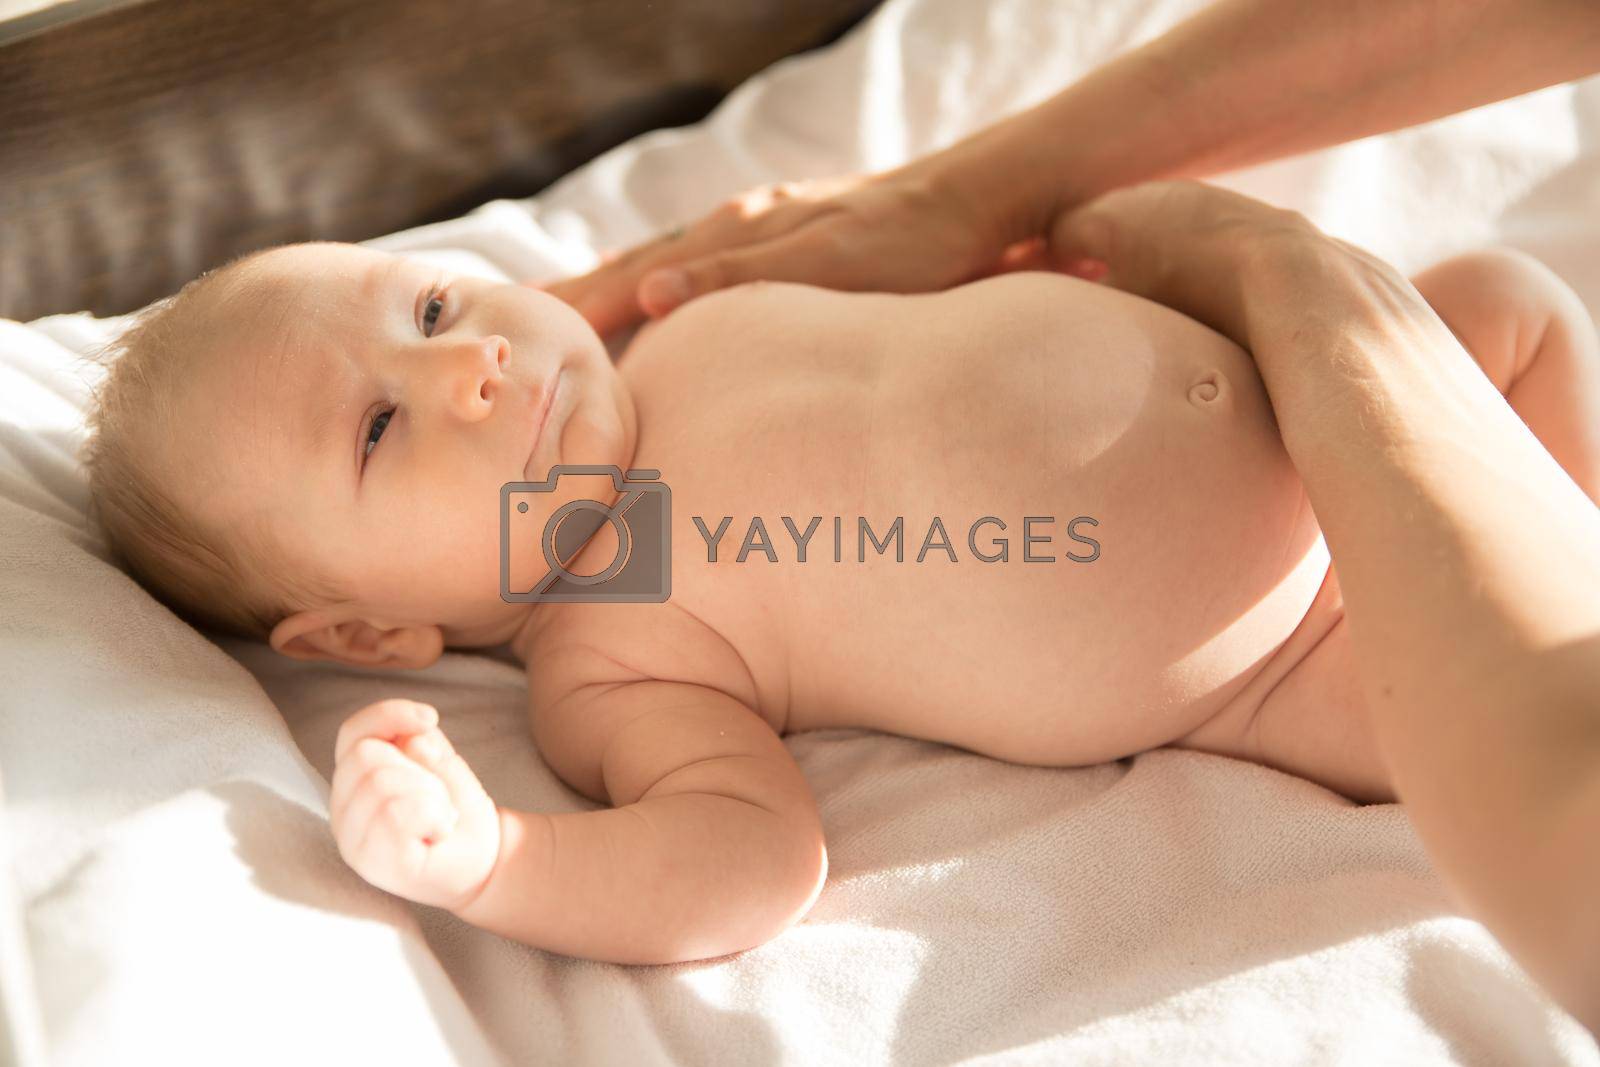 Royalty free image of A little baby lying on a bed on white sheets by Studia72